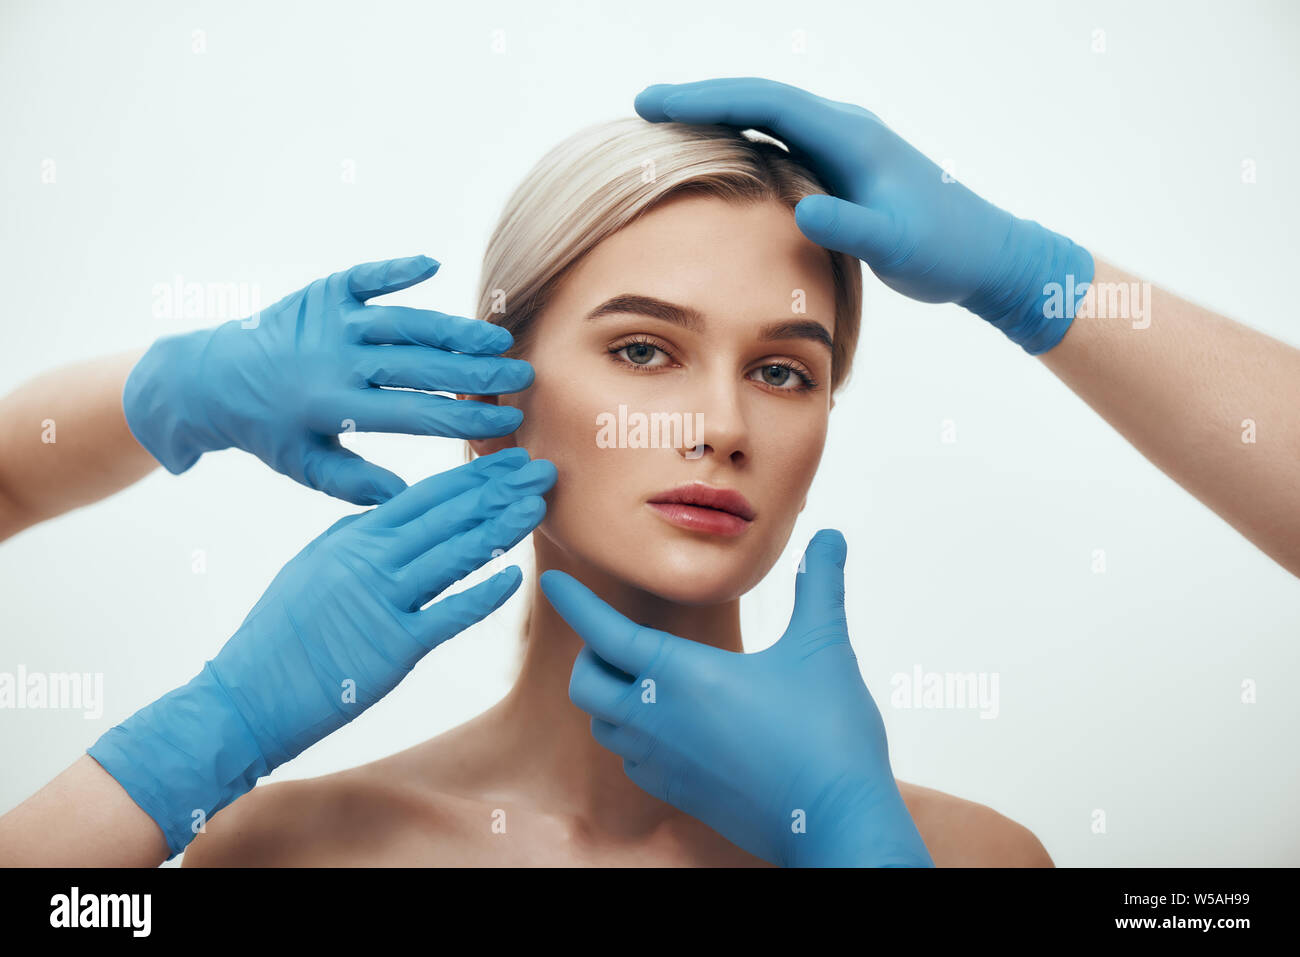 Facial surgery. Beautiful blonde woman waiting for facial surgery while surgeons in blue medical gloves examining her face. Plastic surgery concept. Healthcare. Beauty concept. Stock Photo